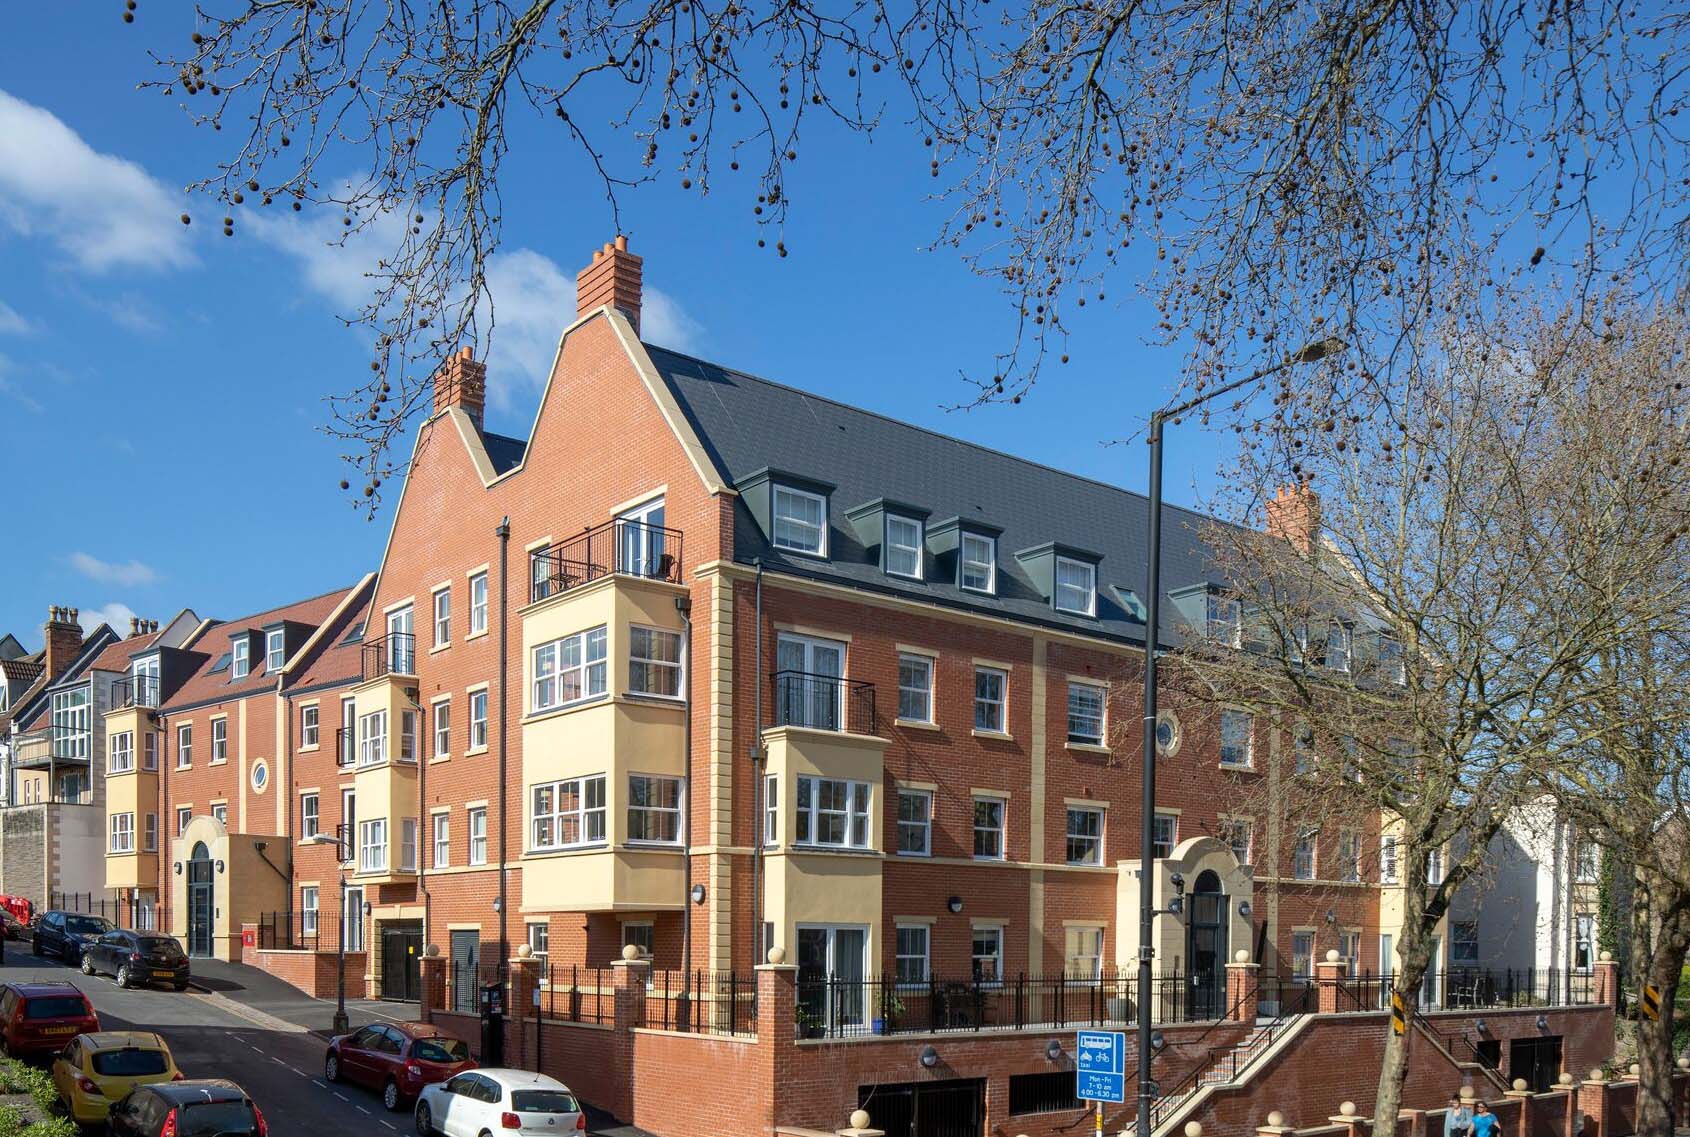 The Old Library development benefits from Kingspan Insulation solution